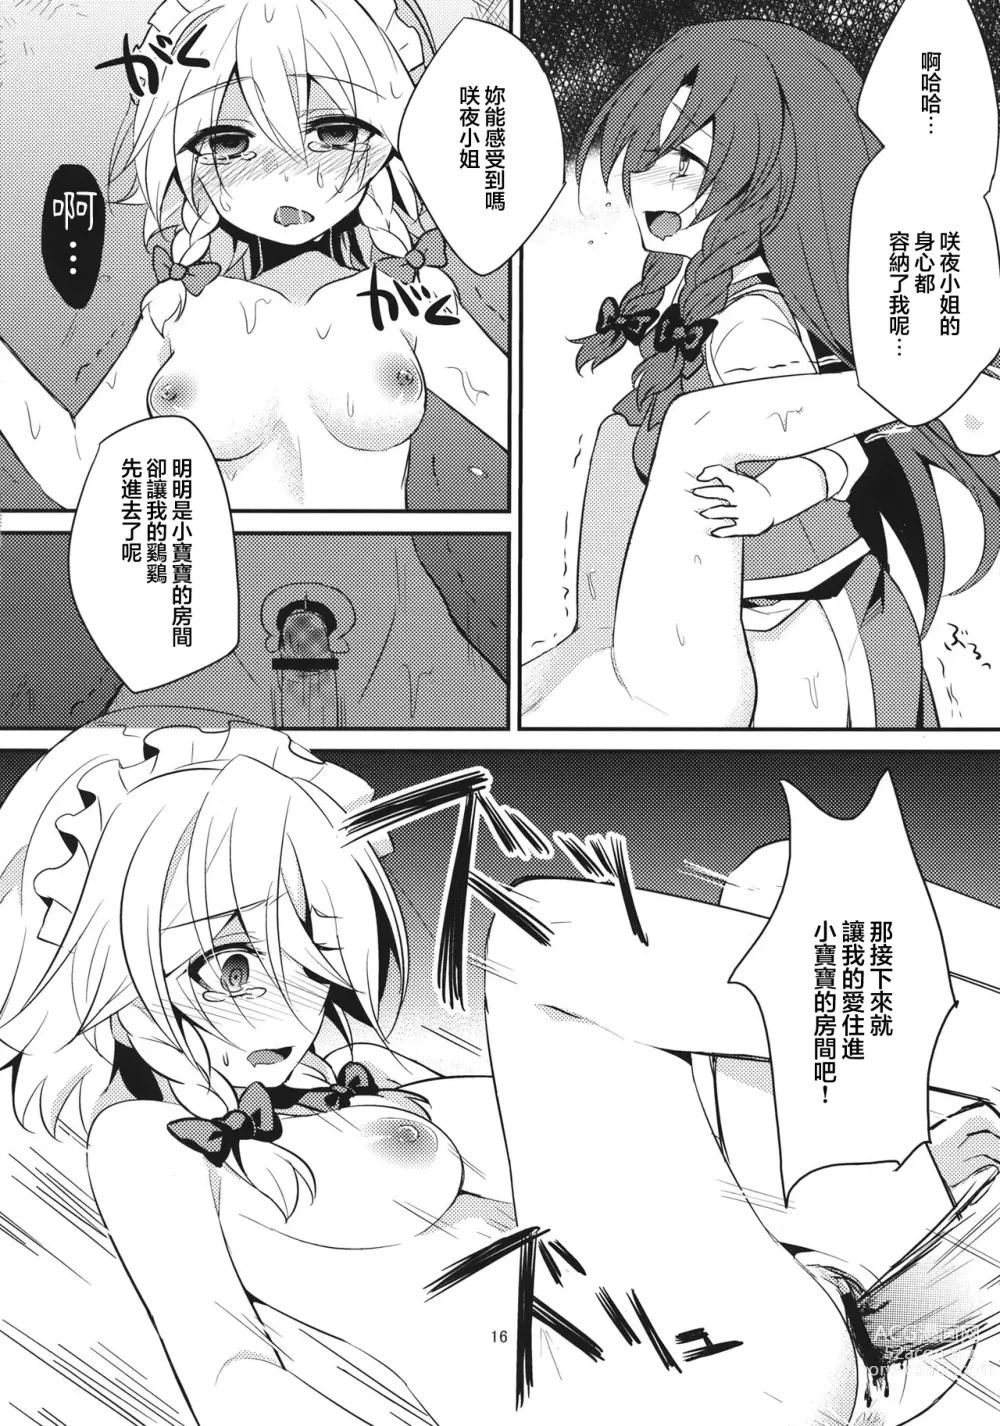 Page 15 of doujinshi 游樂之歌2